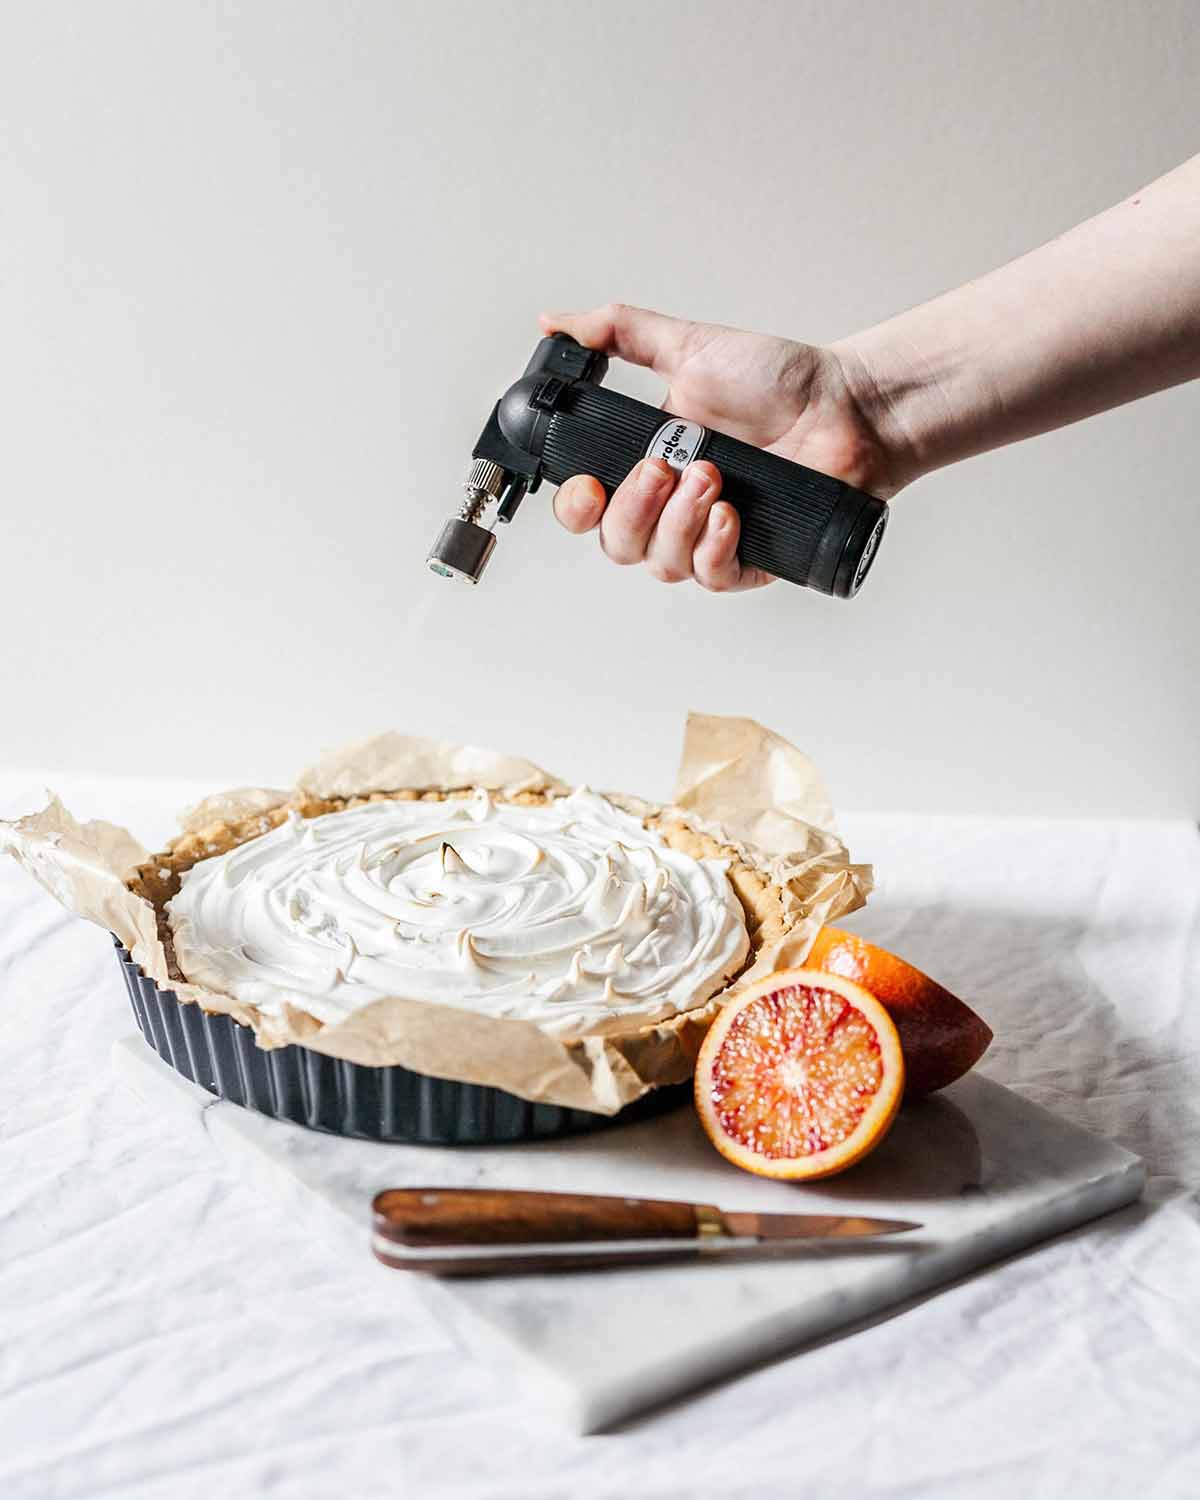 A person toasting a meringue on a tart with a torch.